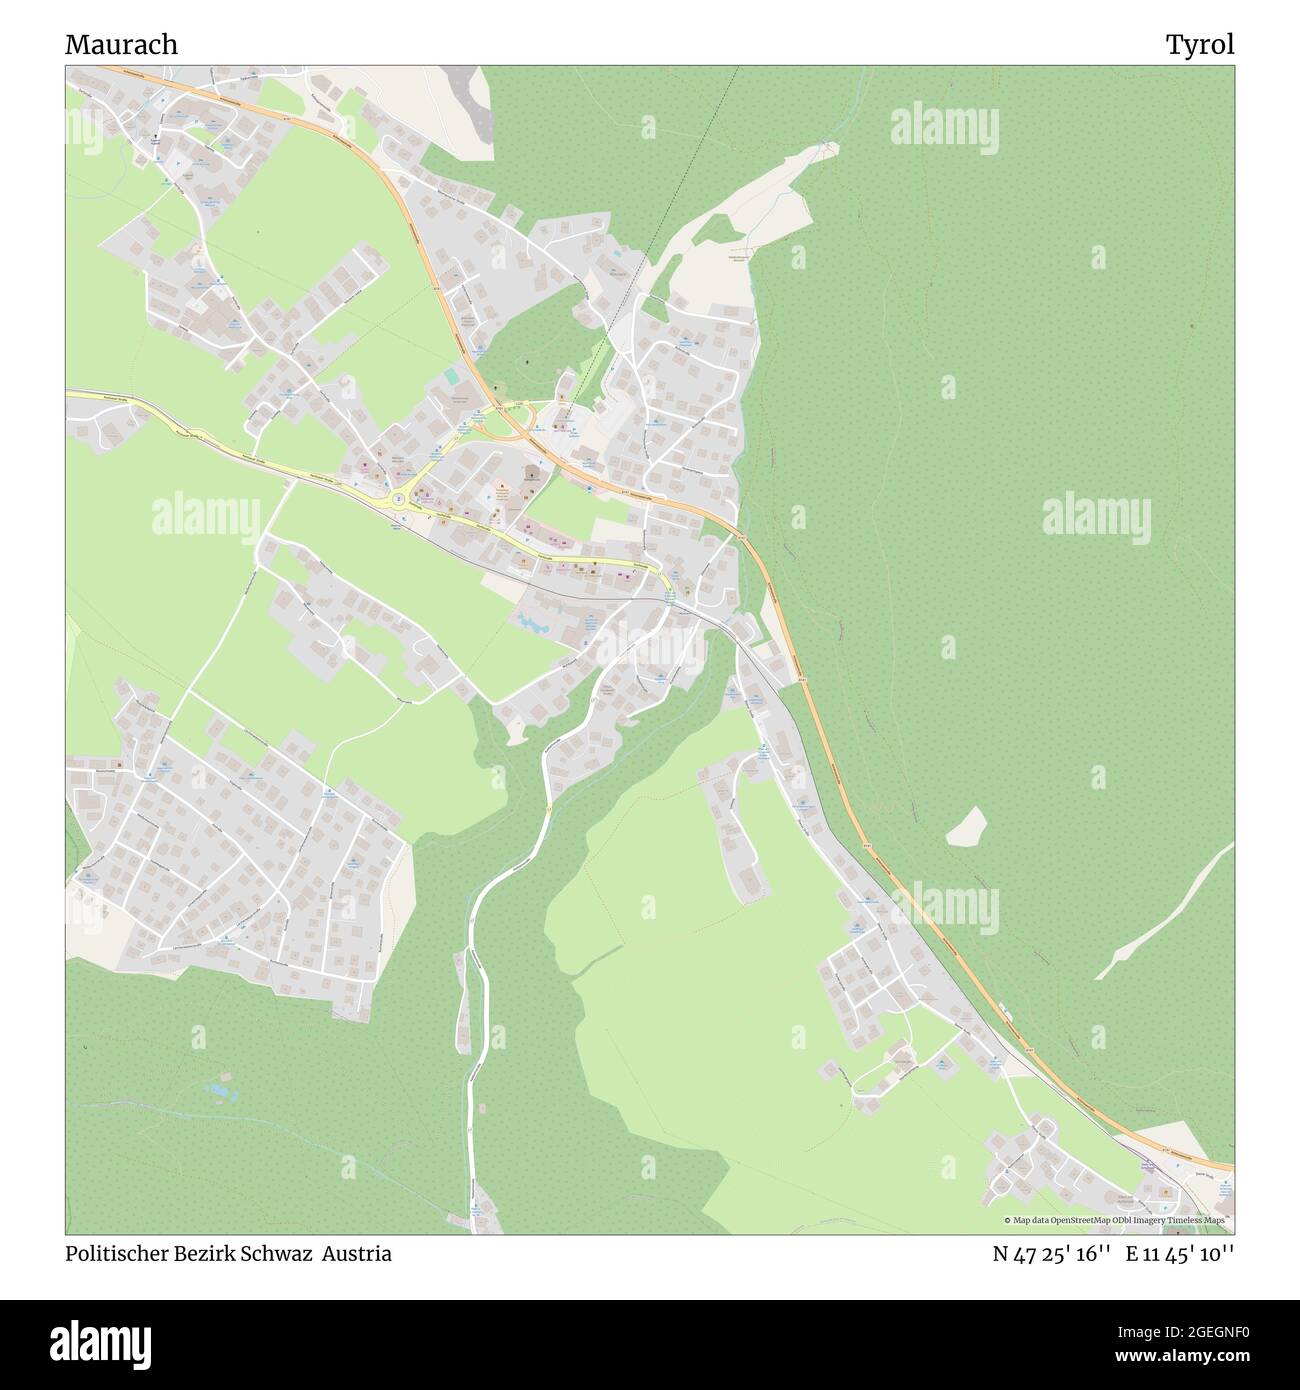 Maurach, Politischer Bezirk Schwaz, Austria, Tyrol, N 47 25' 16'', E 11 45' 10'', map, Timeless Map published in 2021. Travelers, explorers and adventurers like Florence Nightingale, David Livingstone, Ernest Shackleton, Lewis and Clark and Sherlock Holmes relied on maps to plan travels to the world's most remote corners, Timeless Maps is mapping most locations on the globe, showing the achievement of great dreams Stock Photo